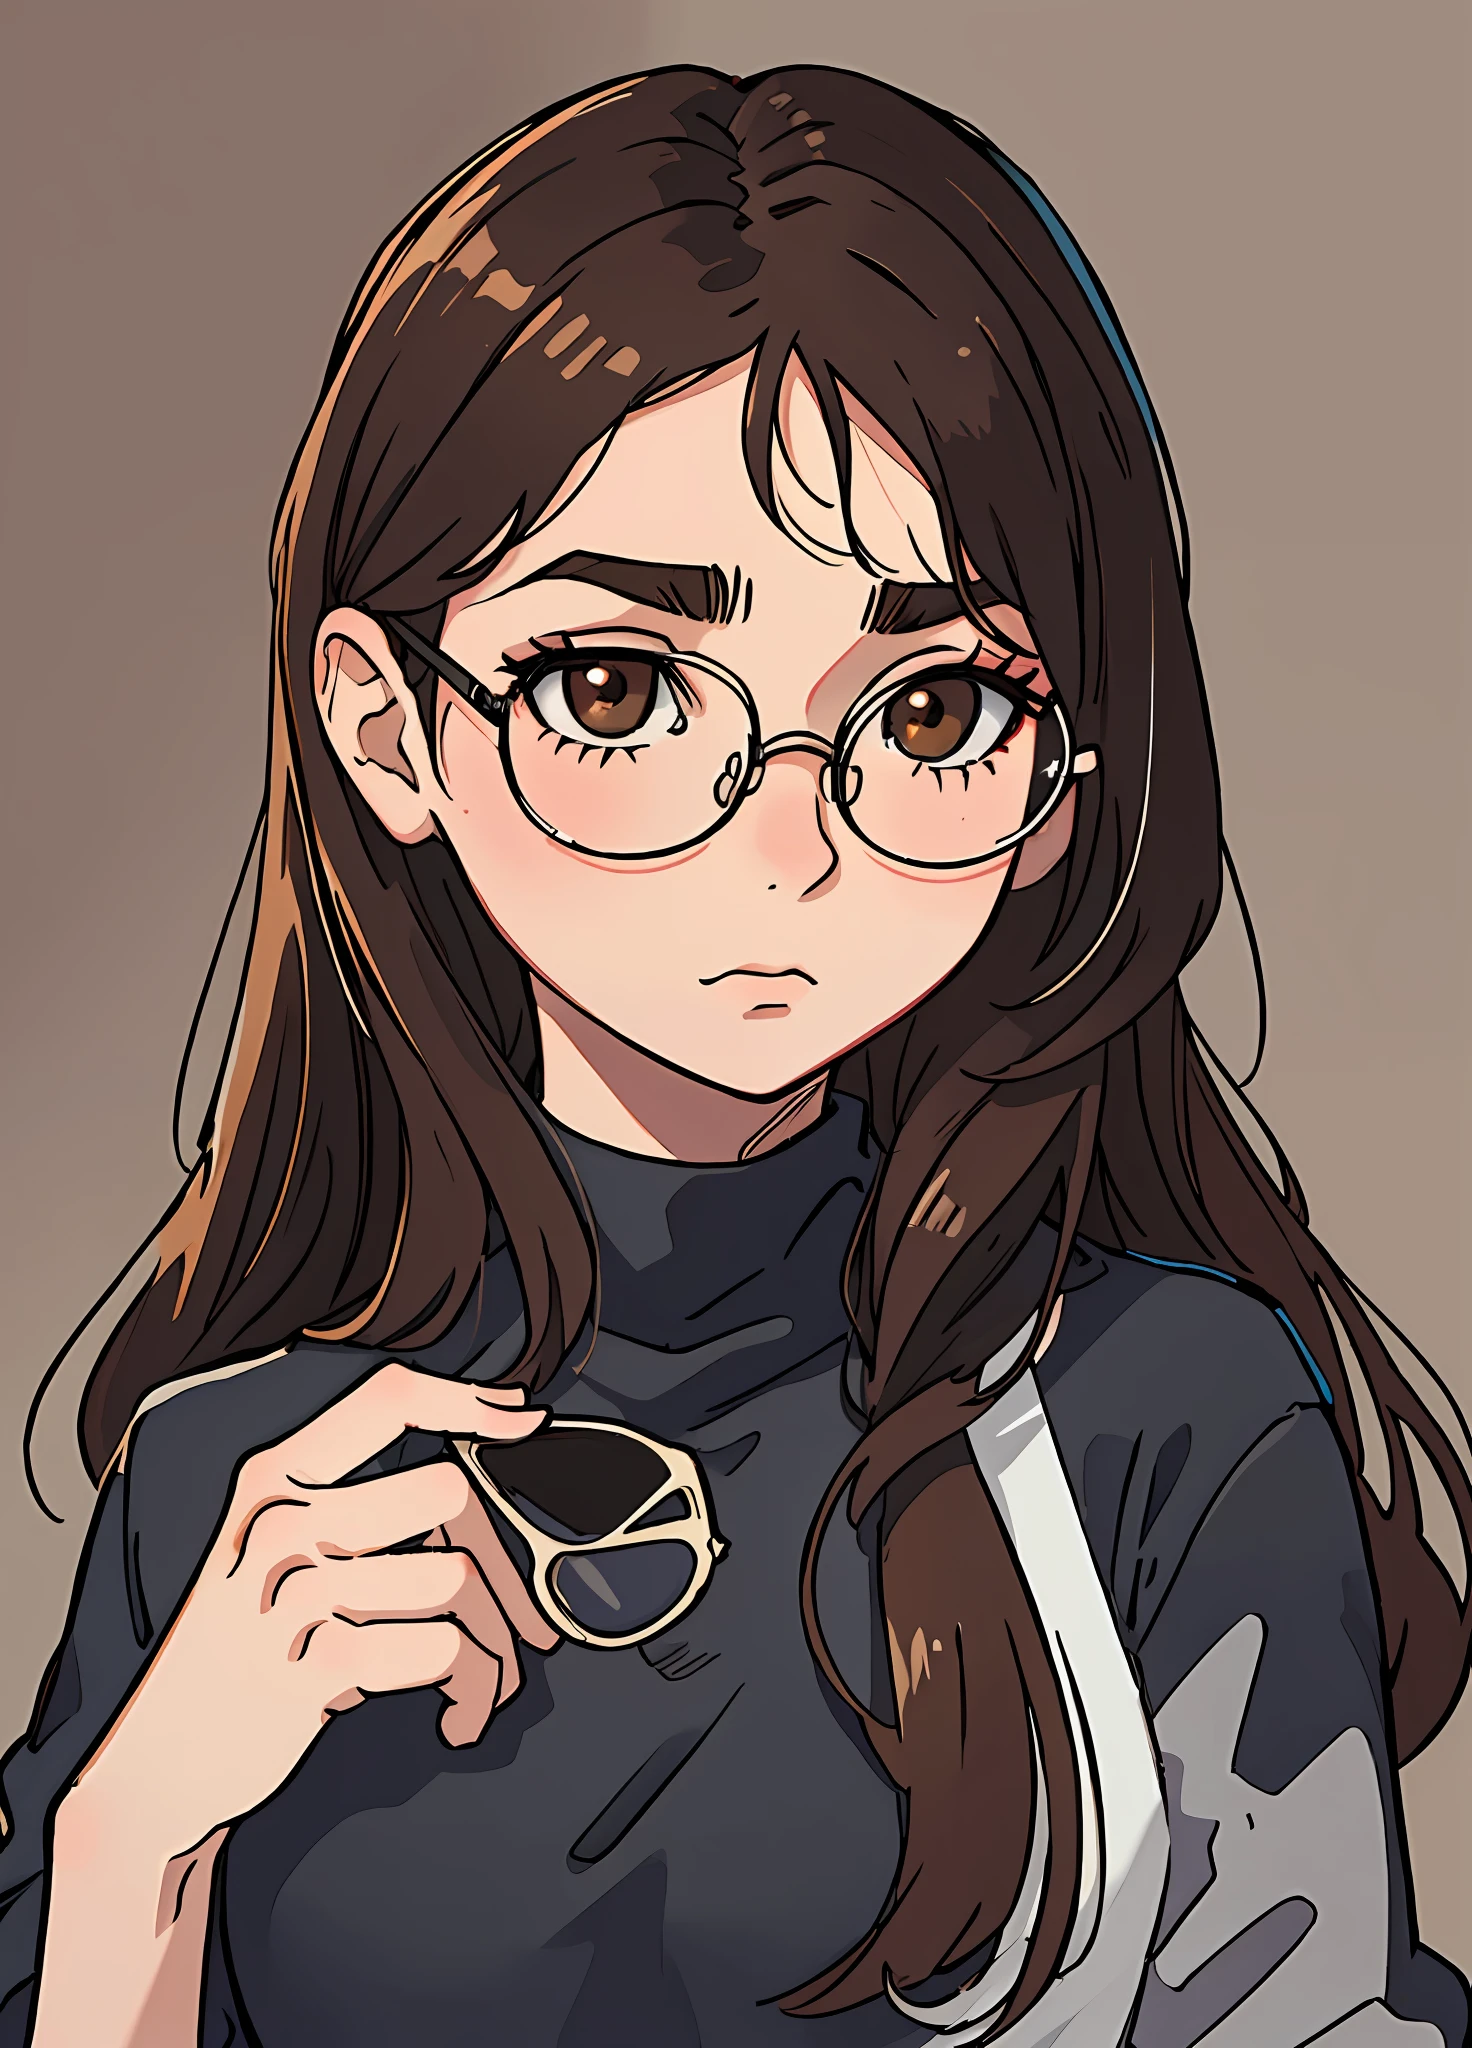 1 girl, thin, dark brown hair, brown eyes, long hair without bangs, messy hair without bangs, passionate look, black clothes without manga, details, masterpiece, good quality, round glasses, thick eyebrow, pale skin, white, fair skin, caucasian